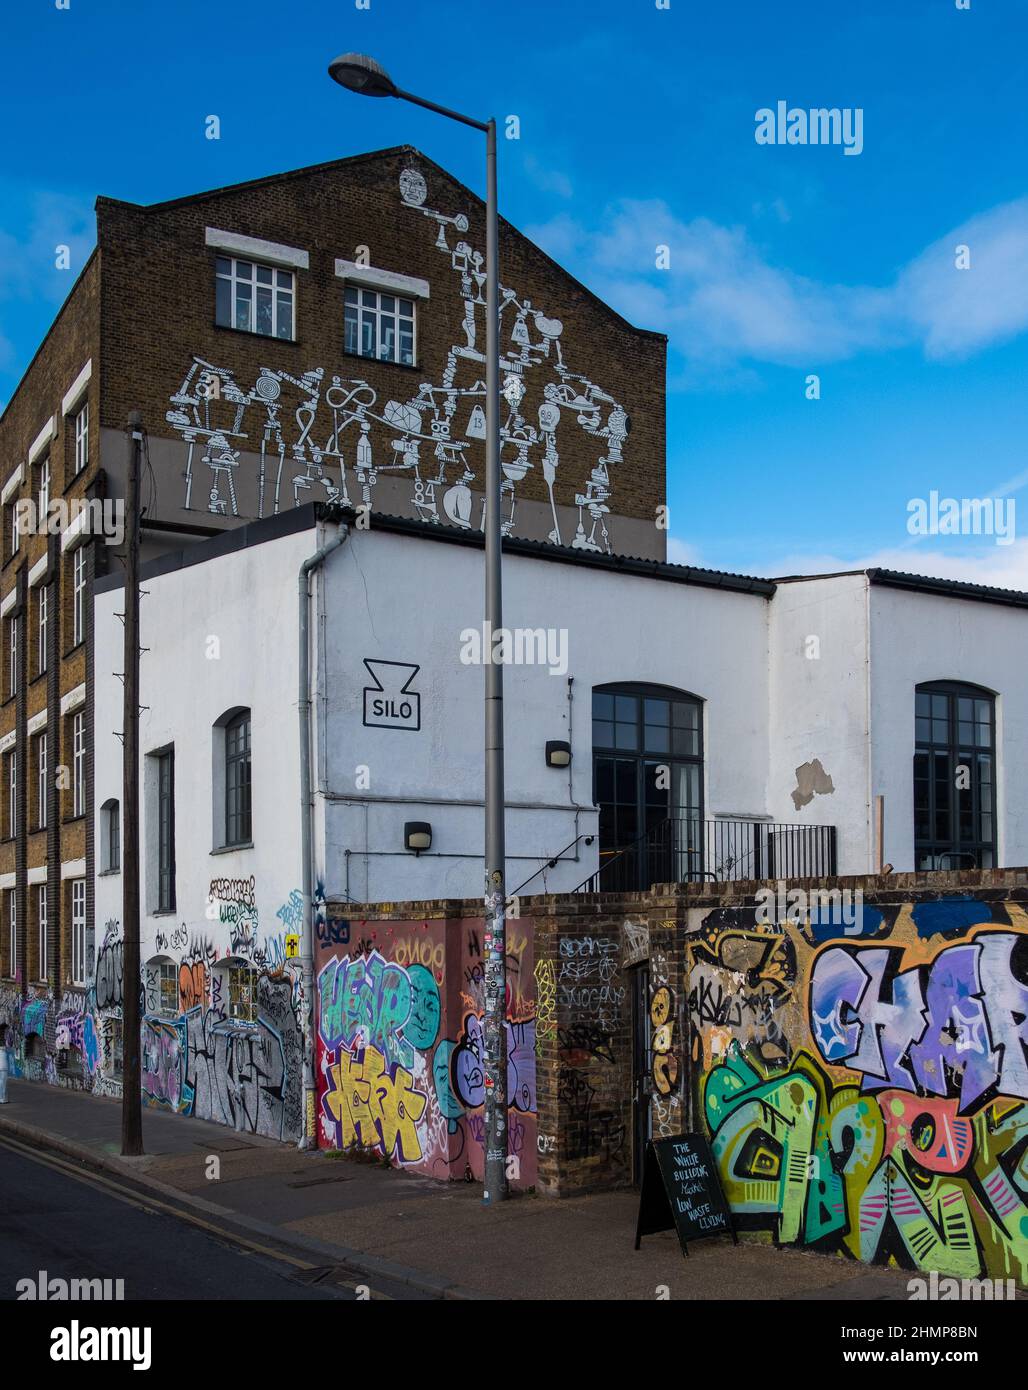 Entrance to Silo restaurant on white post lane in Hackney Wick, East London. Silo offers Zero Waste dining through a pre industrial food system Stock Photo